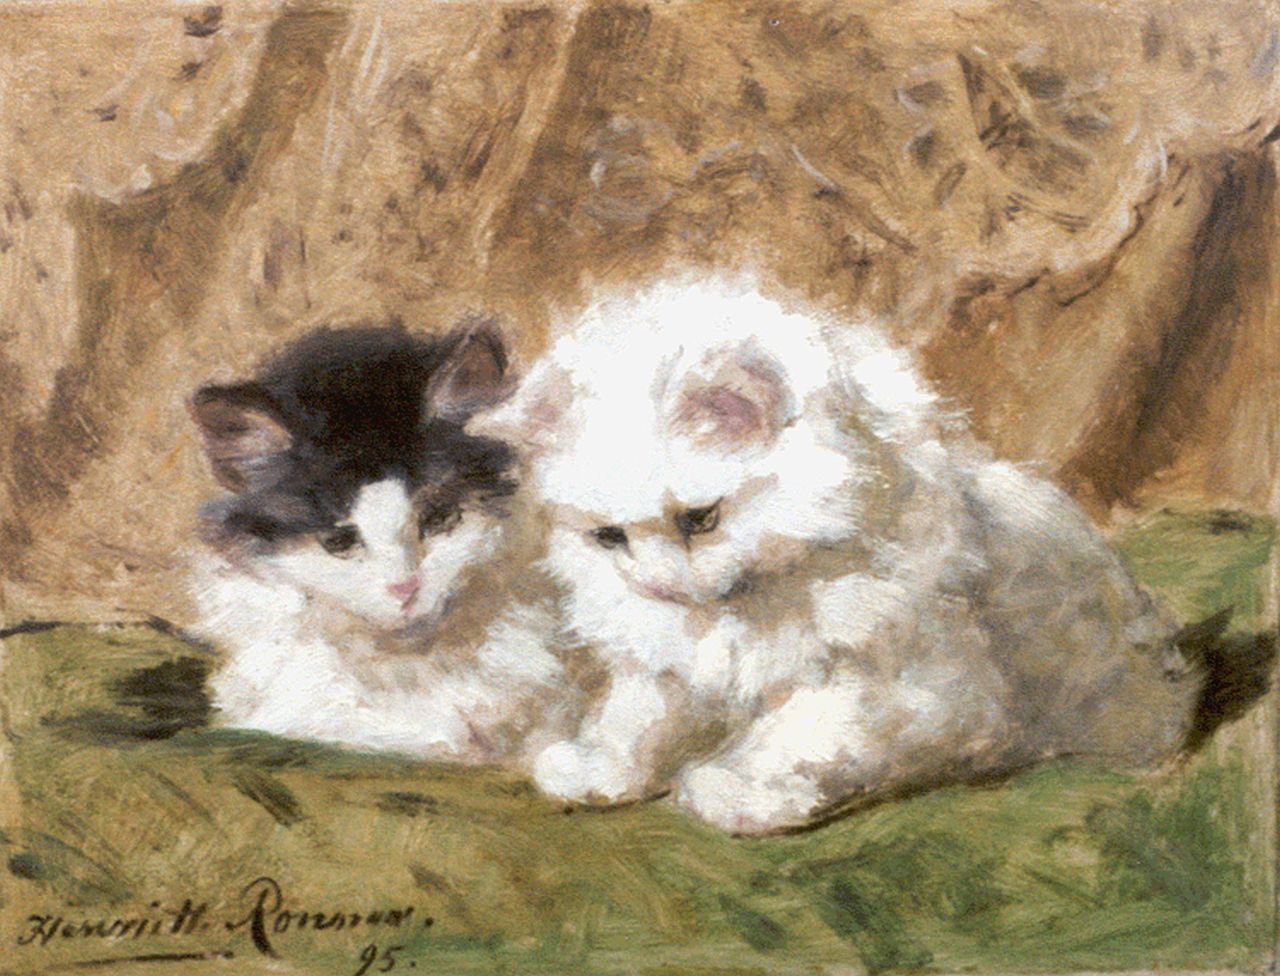 Ronner-Knip H.  | Henriette Ronner-Knip, Two kittens, 21.2 x 27.5 cm, signed l.l. and dated '95